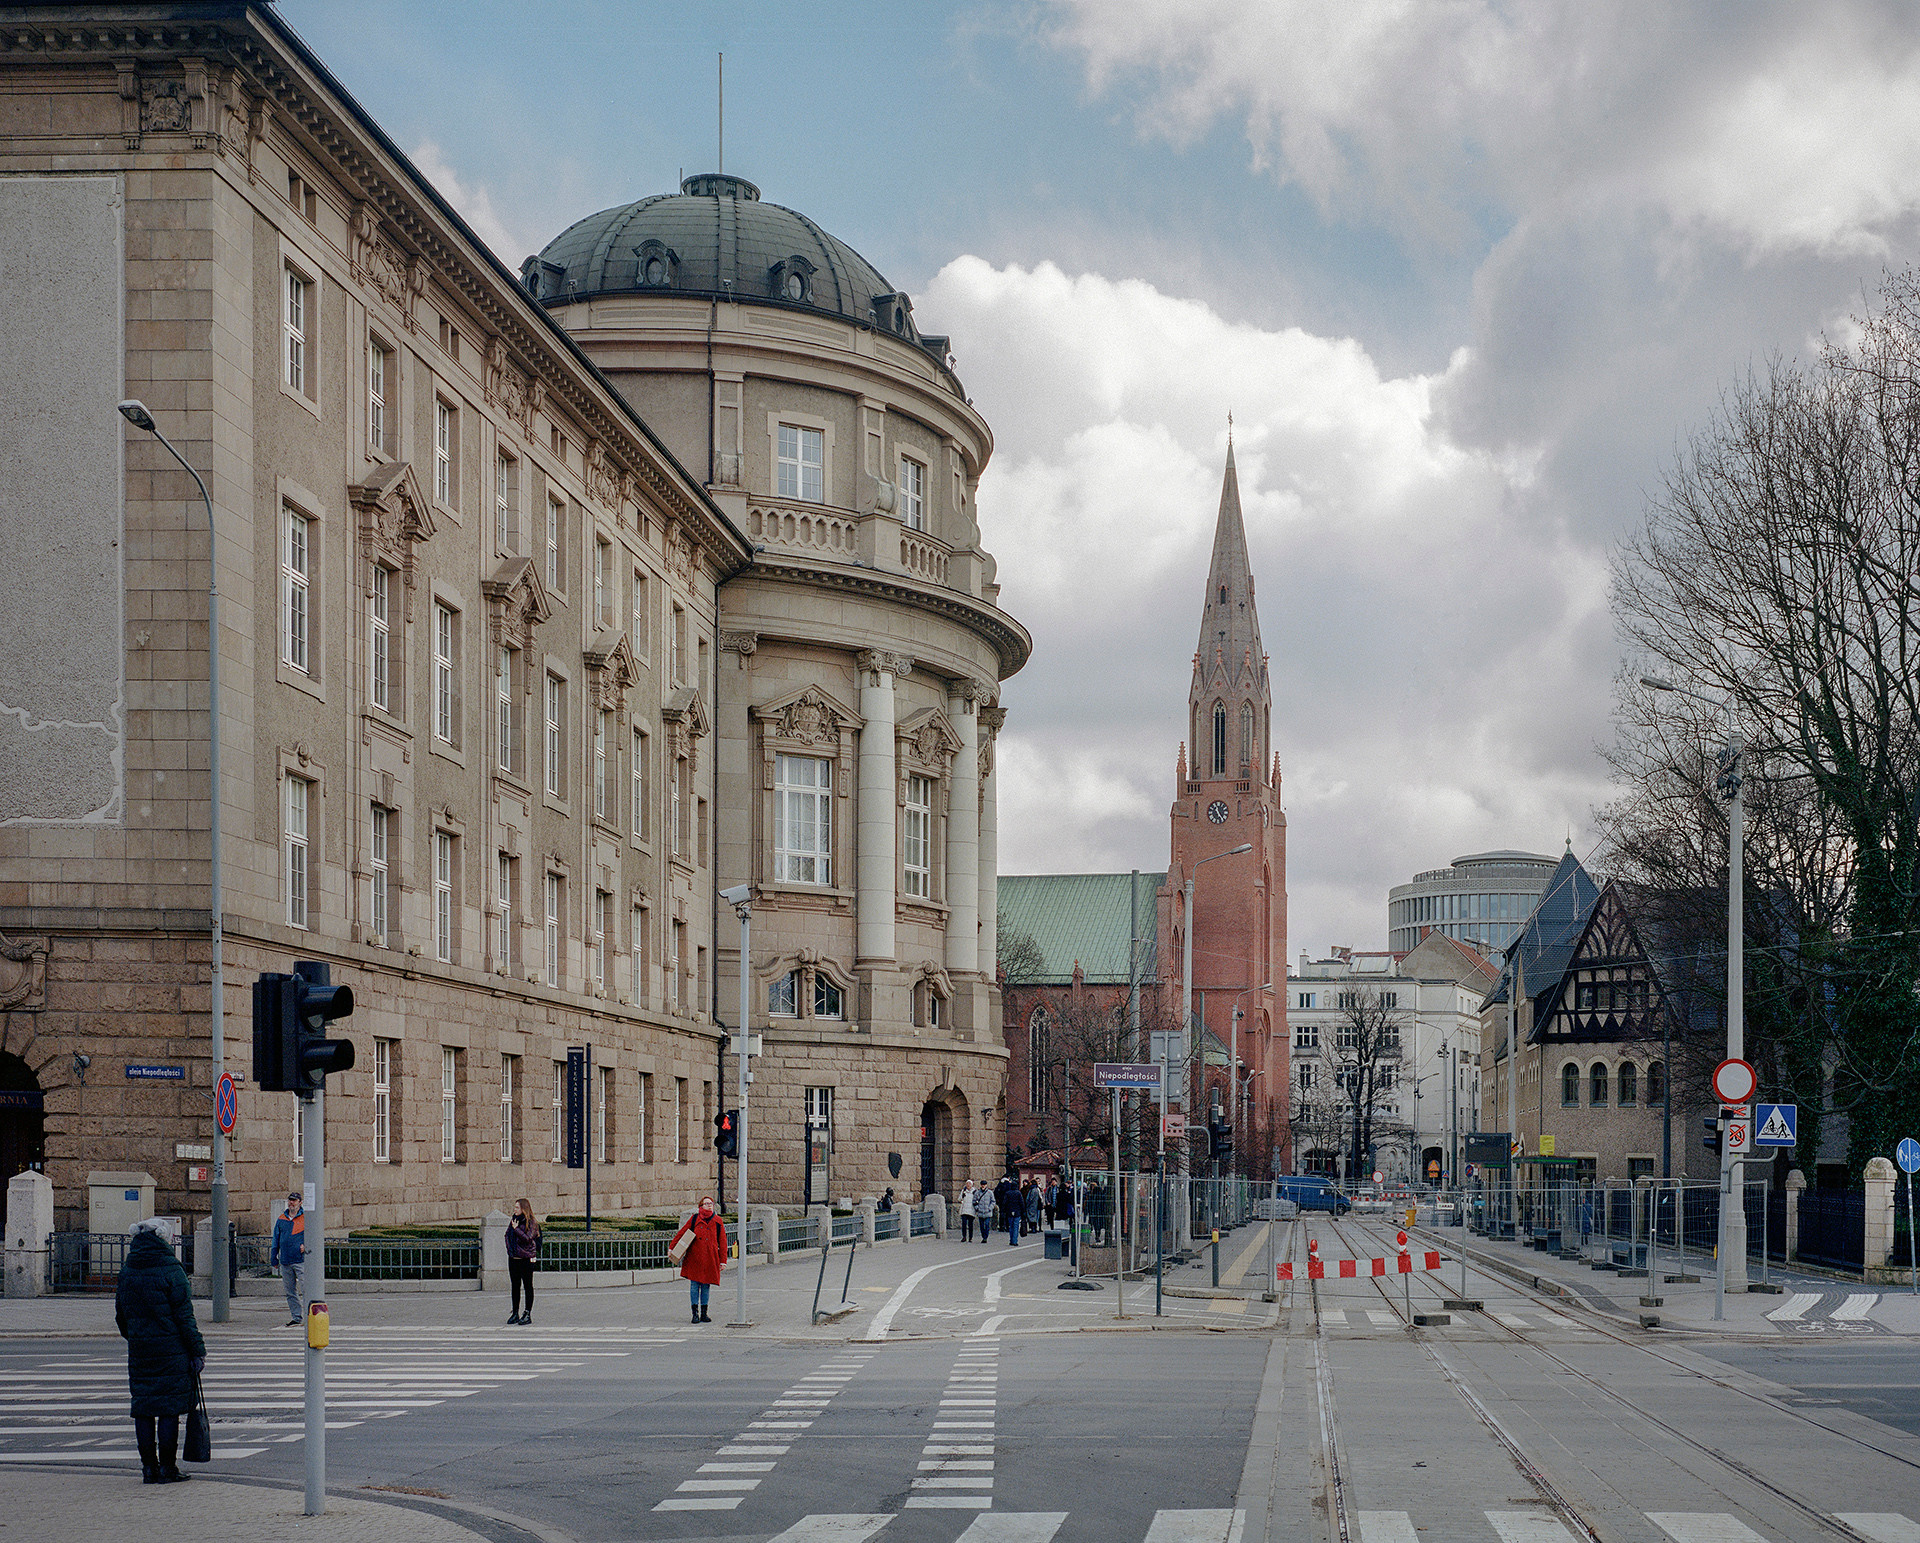 From left to right: former Royal Prussian Settlement Commission, today Collegium Maius of the Adam Mickiewicz University, former German Evangelical church Sankt Pauli, now Catholic church of Holy Savior, and, across the street, a small portion of the former Royal Residence Castle (Königliches Residenzschloss), all part of a German redevelopment plan dubbed the Imperial Quarter, Poznan, Poland